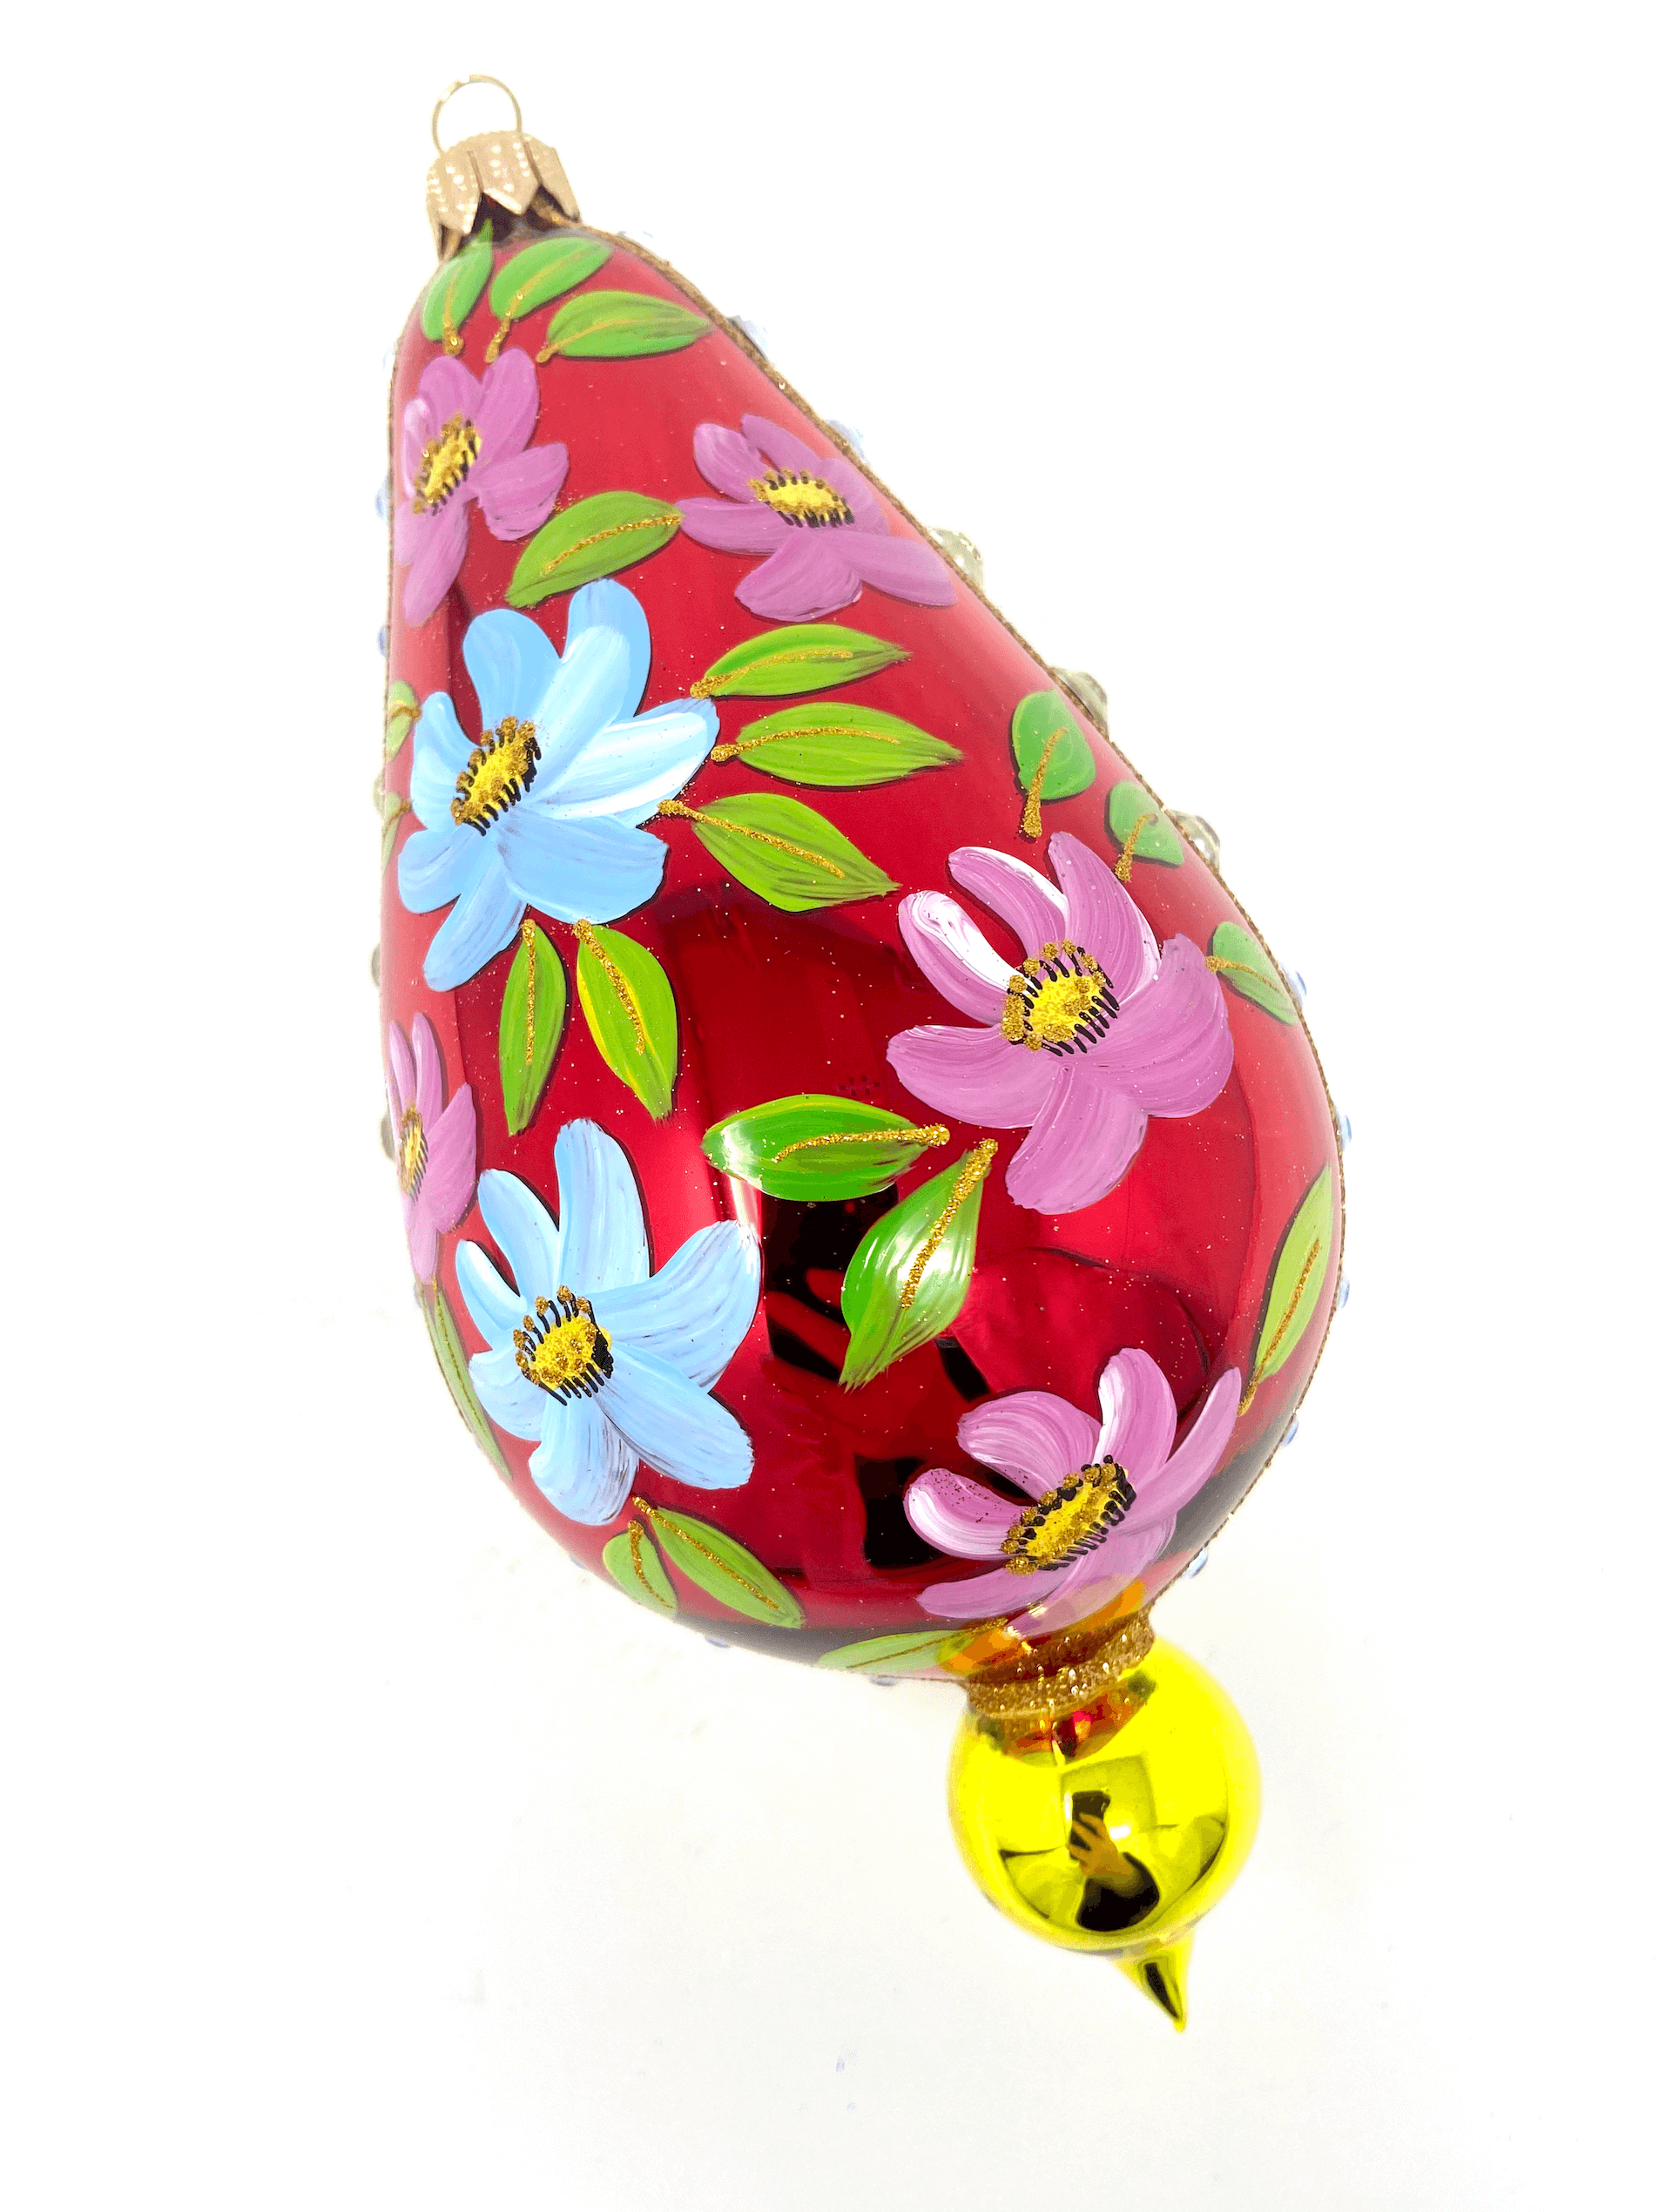 Red eggplant shaped ornament featuring gemstones, intricate gold detailing, and hand painted floral blooms. A Christmas polish glass ornament. Floral Escape Floral Fetish.